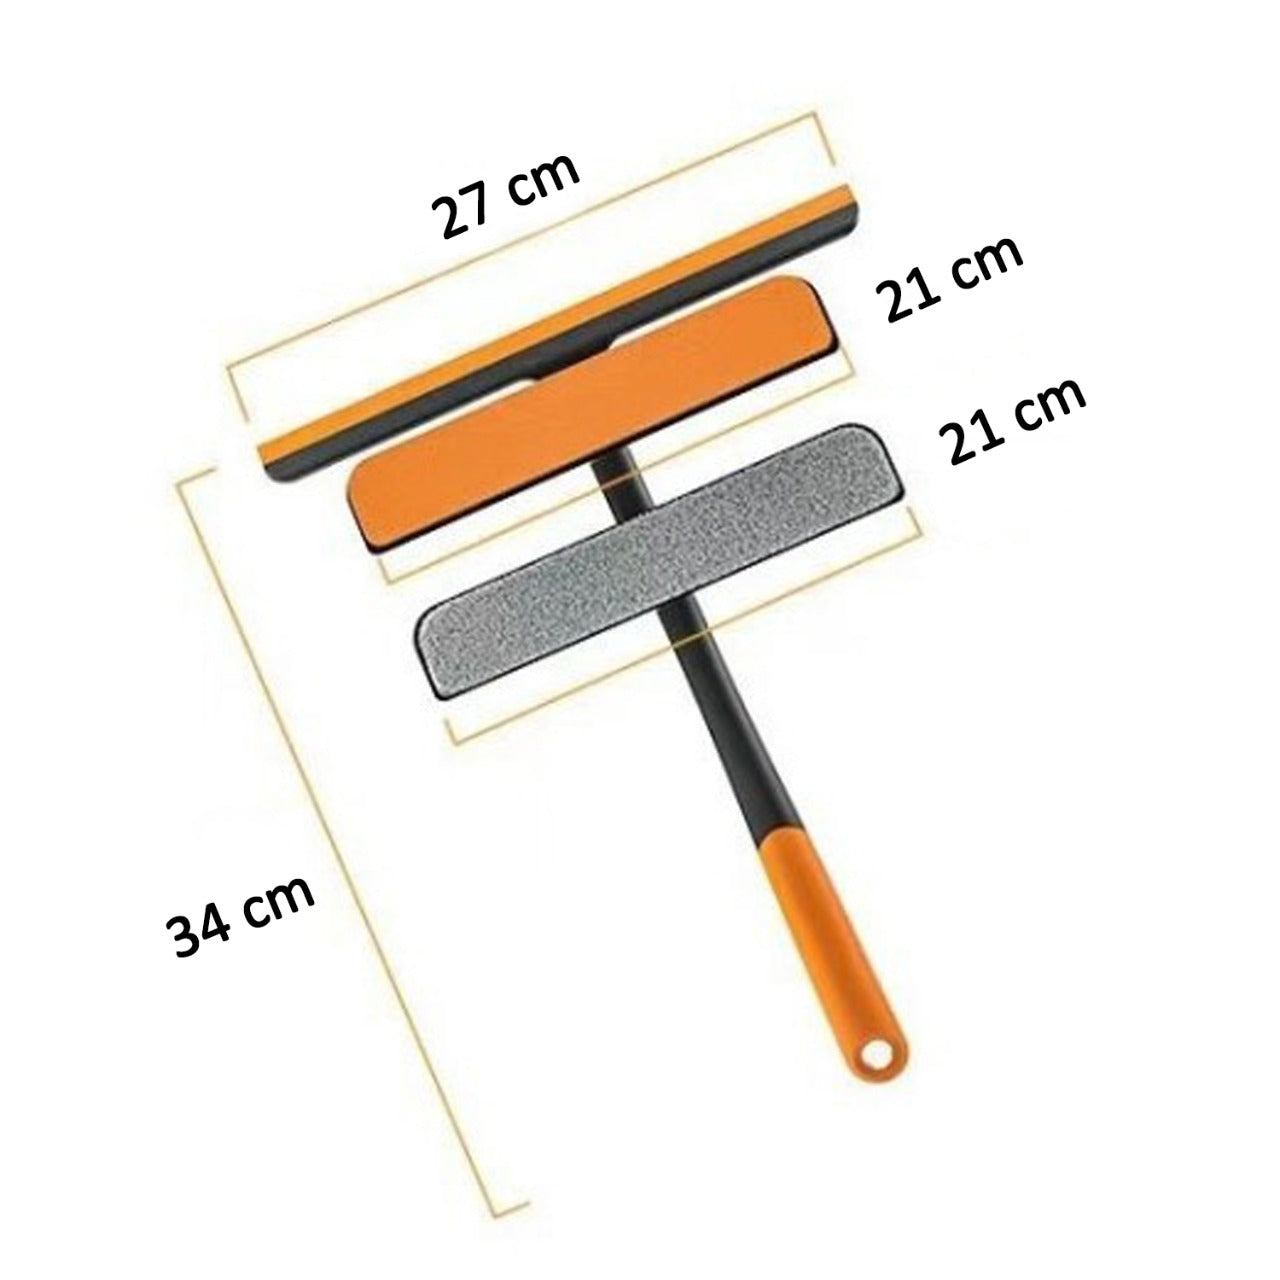 6087A PLASTIC 3 IN 1 ROTATABLE DOUBLE SIDE DESIGN CLEANING BRUSH GLASS WIPER FOR GLASS WINDOW, CAR WINDOW, MIRROR, FLOOR (MULTICOLOR) 